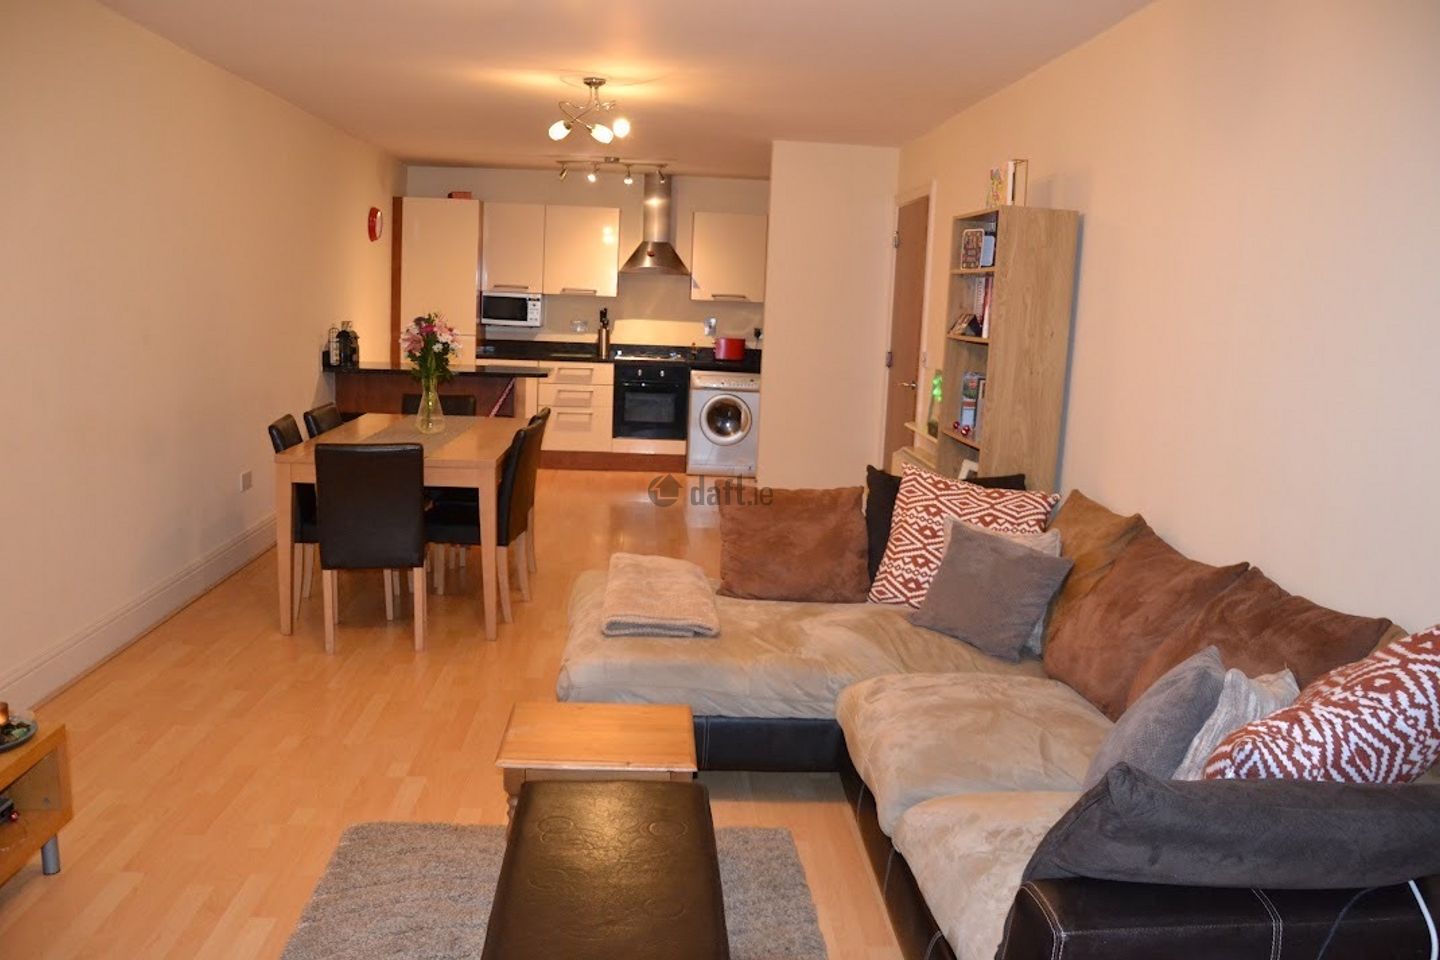 Apartment 77, Priory Court, Delgany, Co. Wicklow